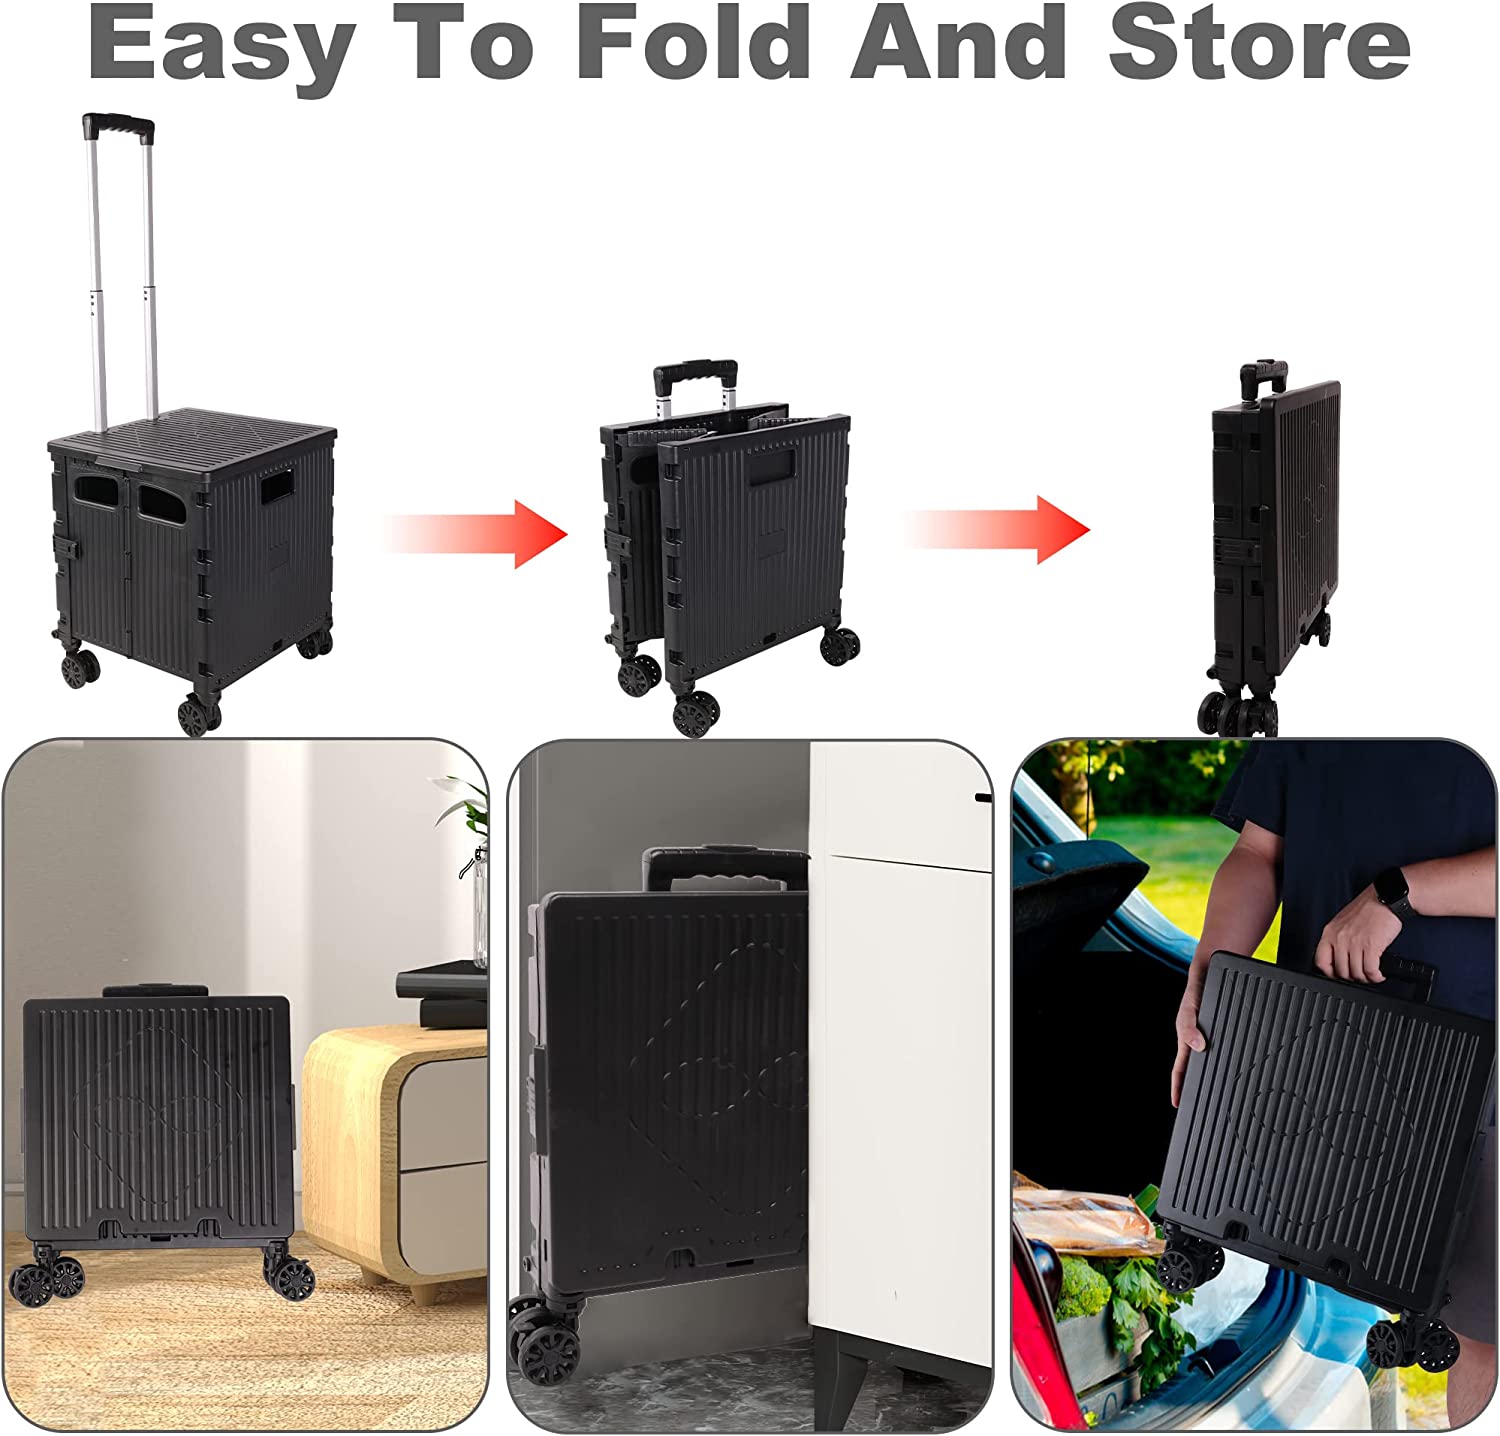 Foldable Portable Storage Rolling Utility Cart  Crate with Telescoping Handle & Lid, Black